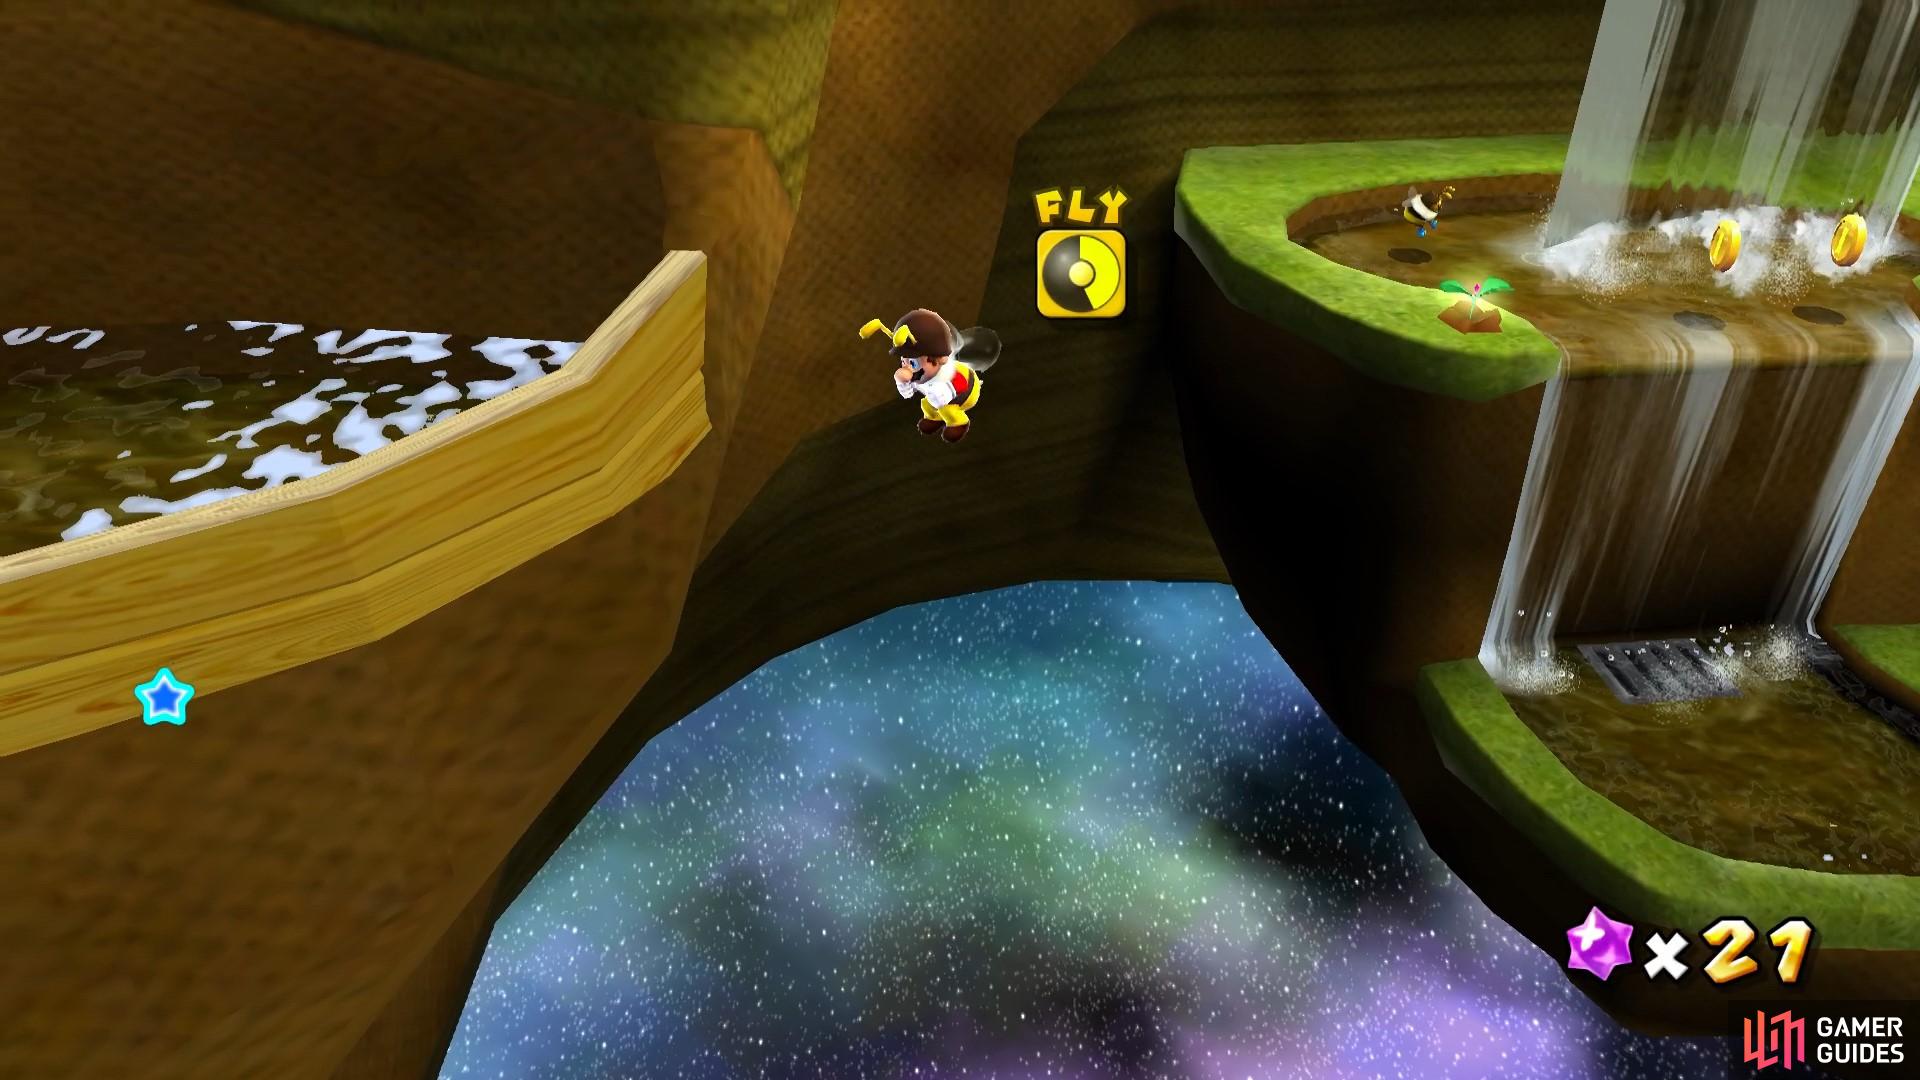 You’ll need to fly across to the otherside of the planet using Bee Mario form.